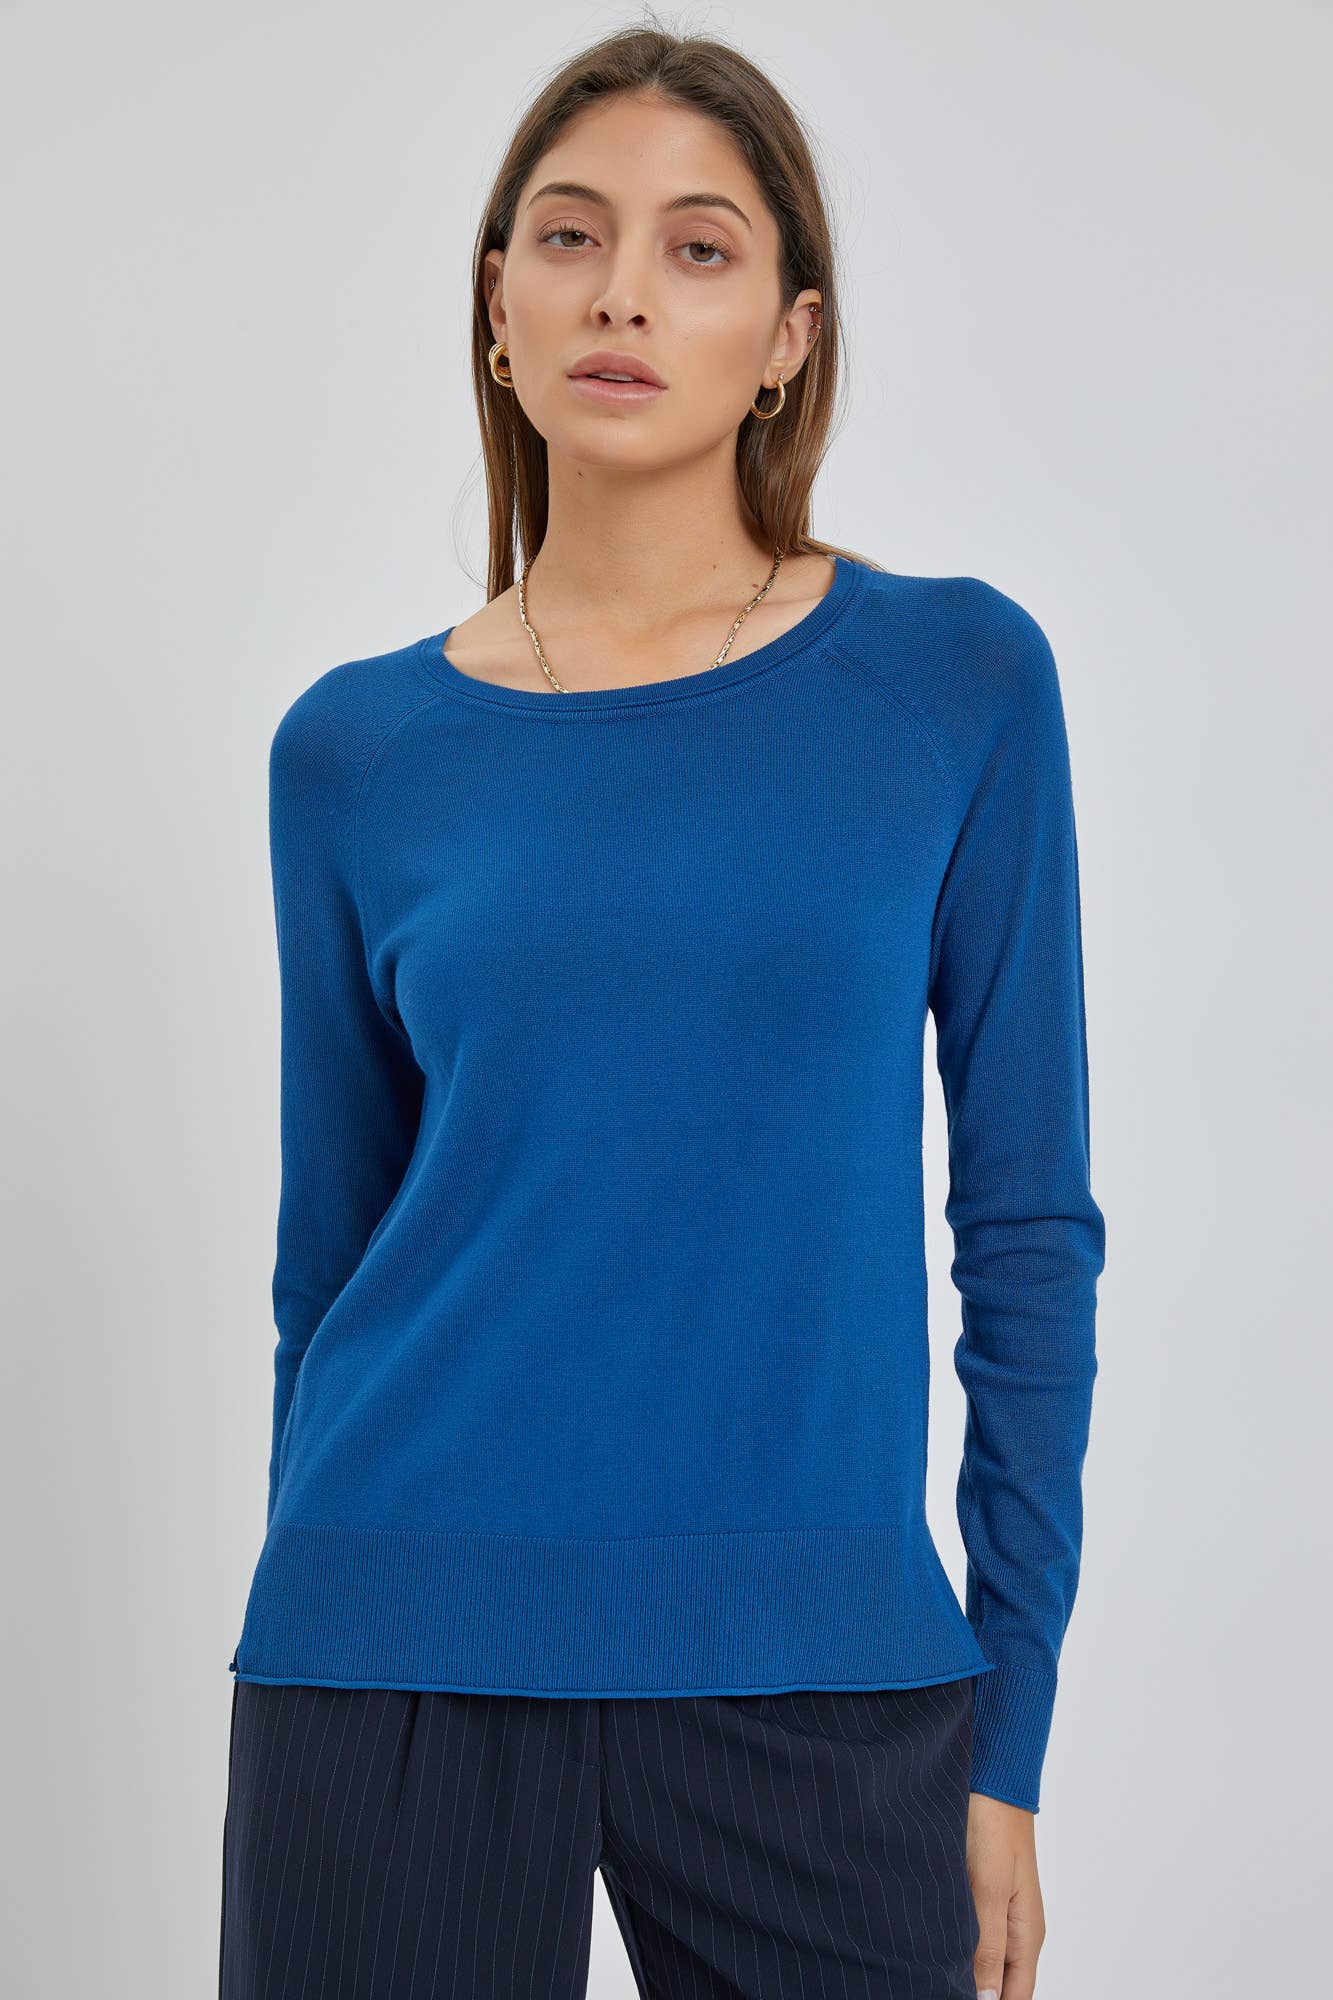 The Camille Sweater: Large / Cobalt